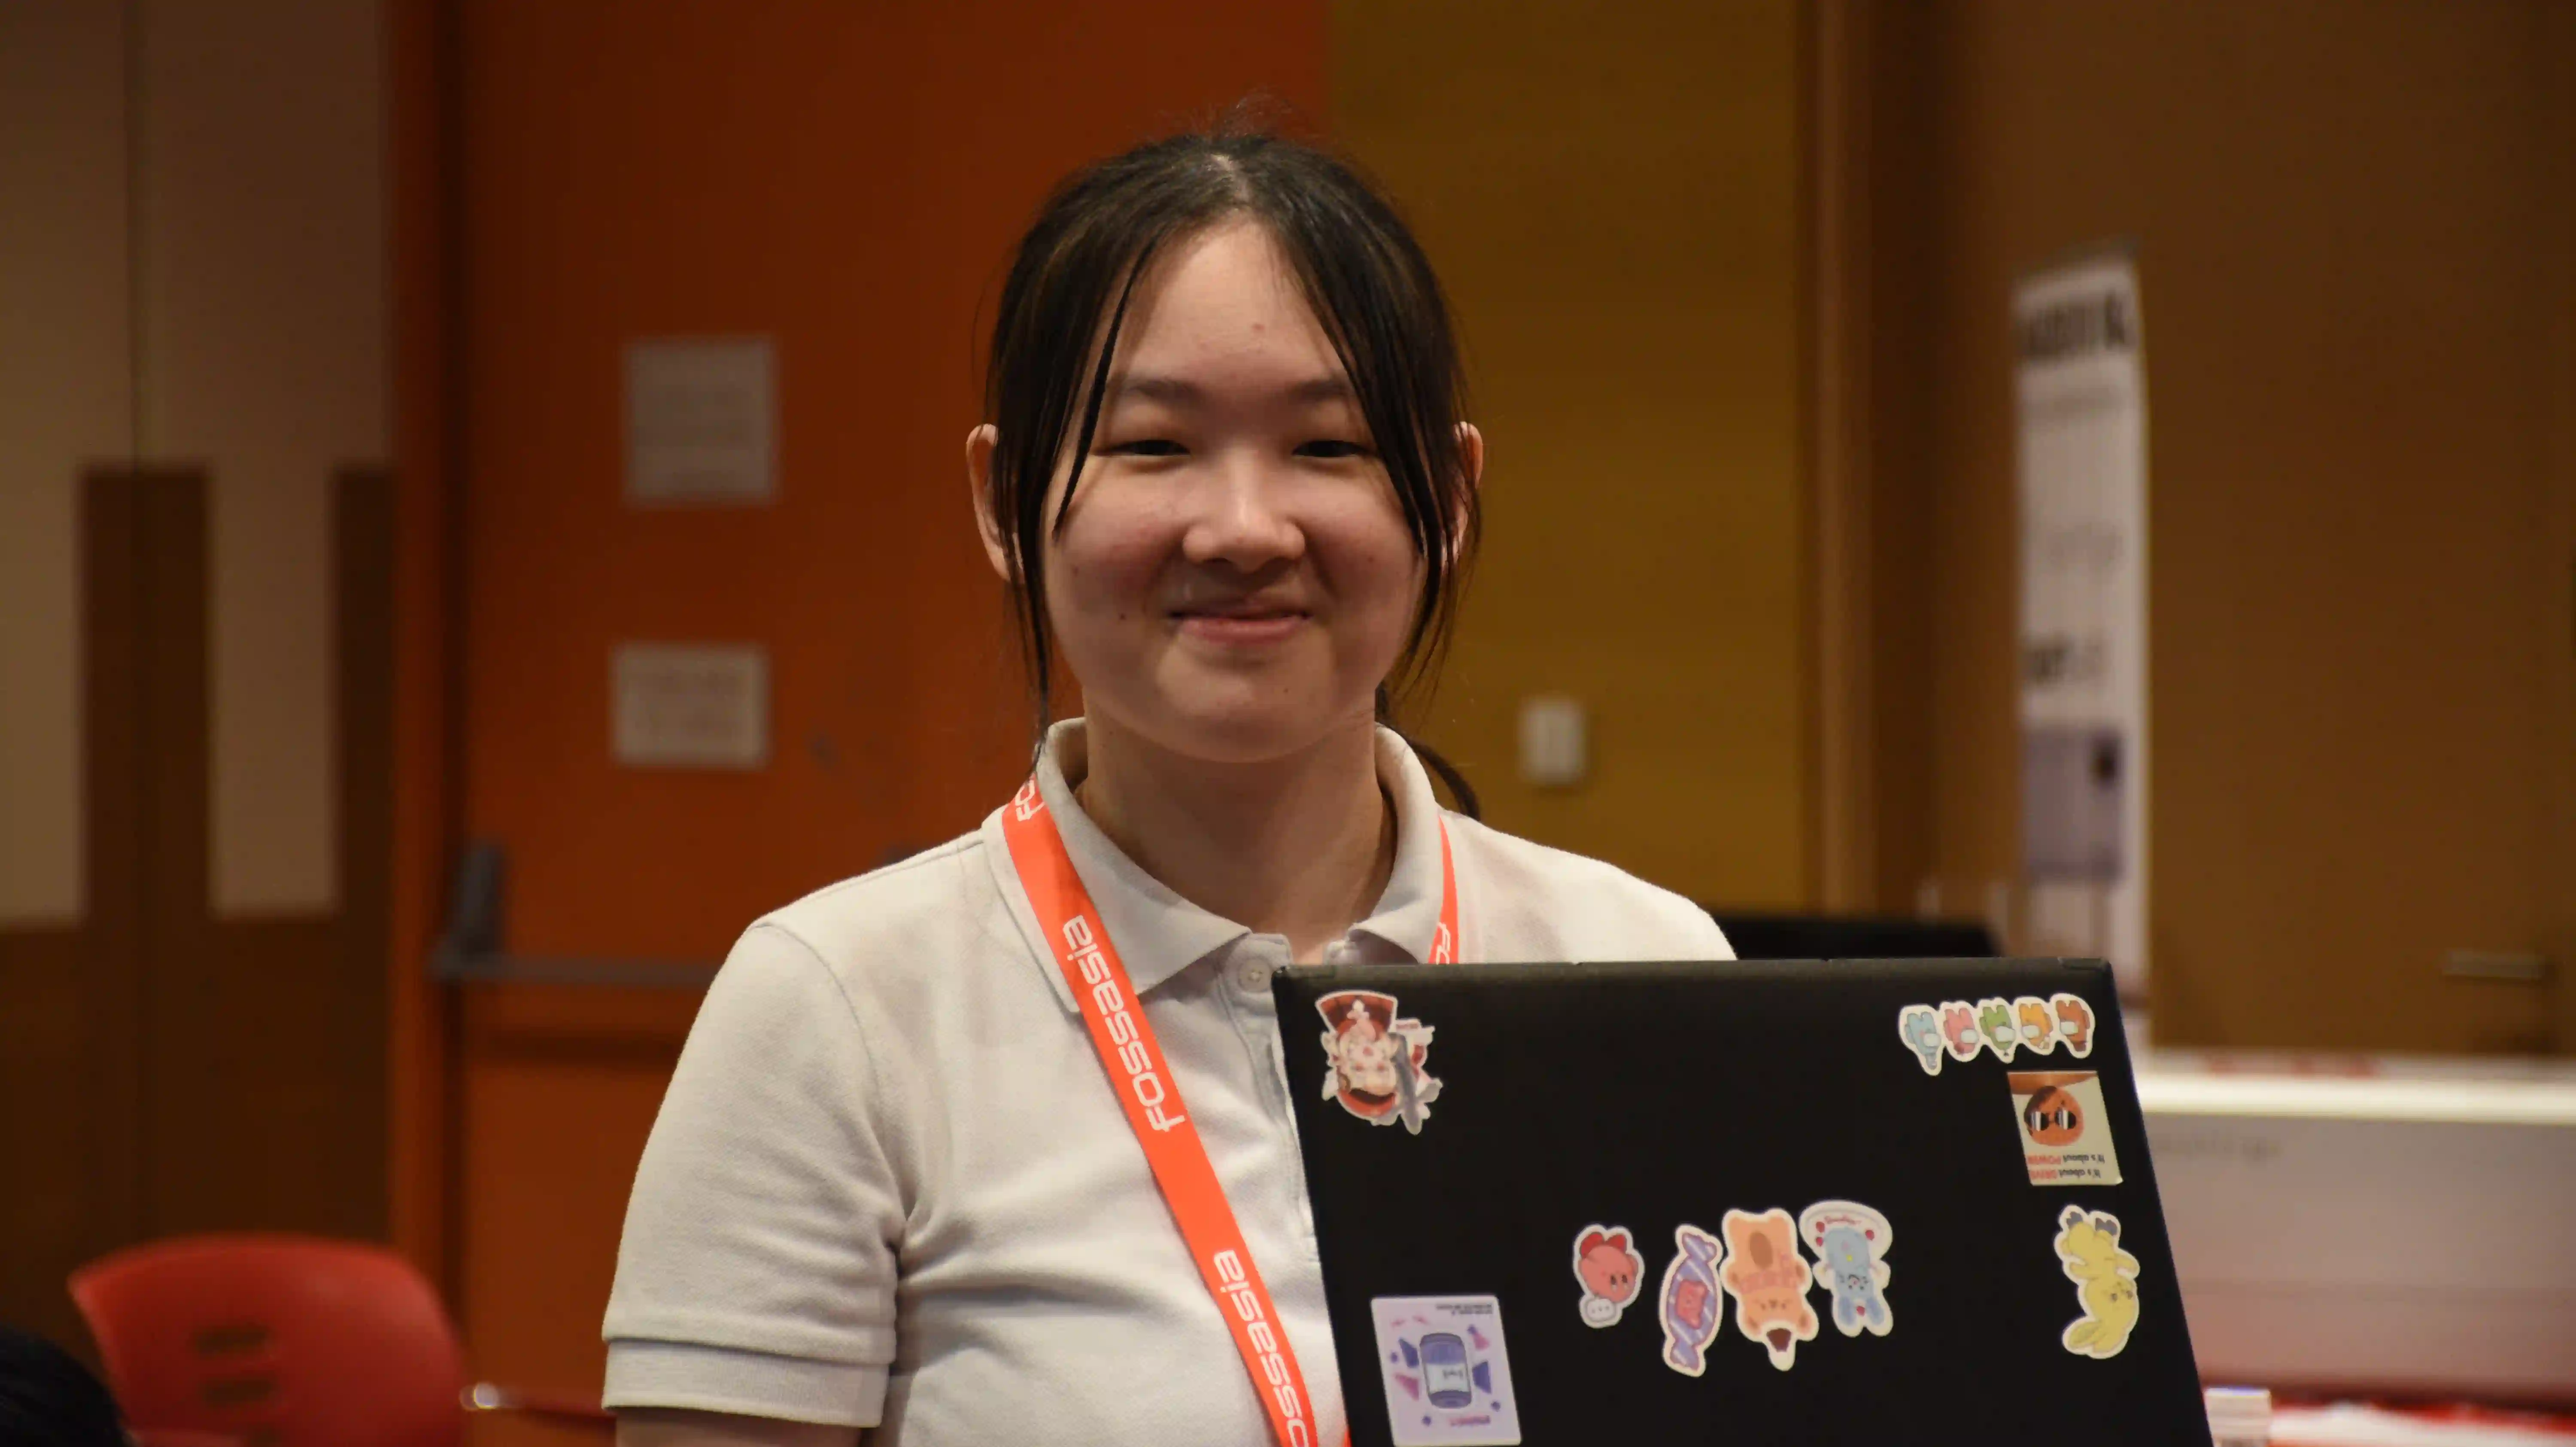 An image of a lady with a FossAsia lanyard holding a laptop in a auditorium